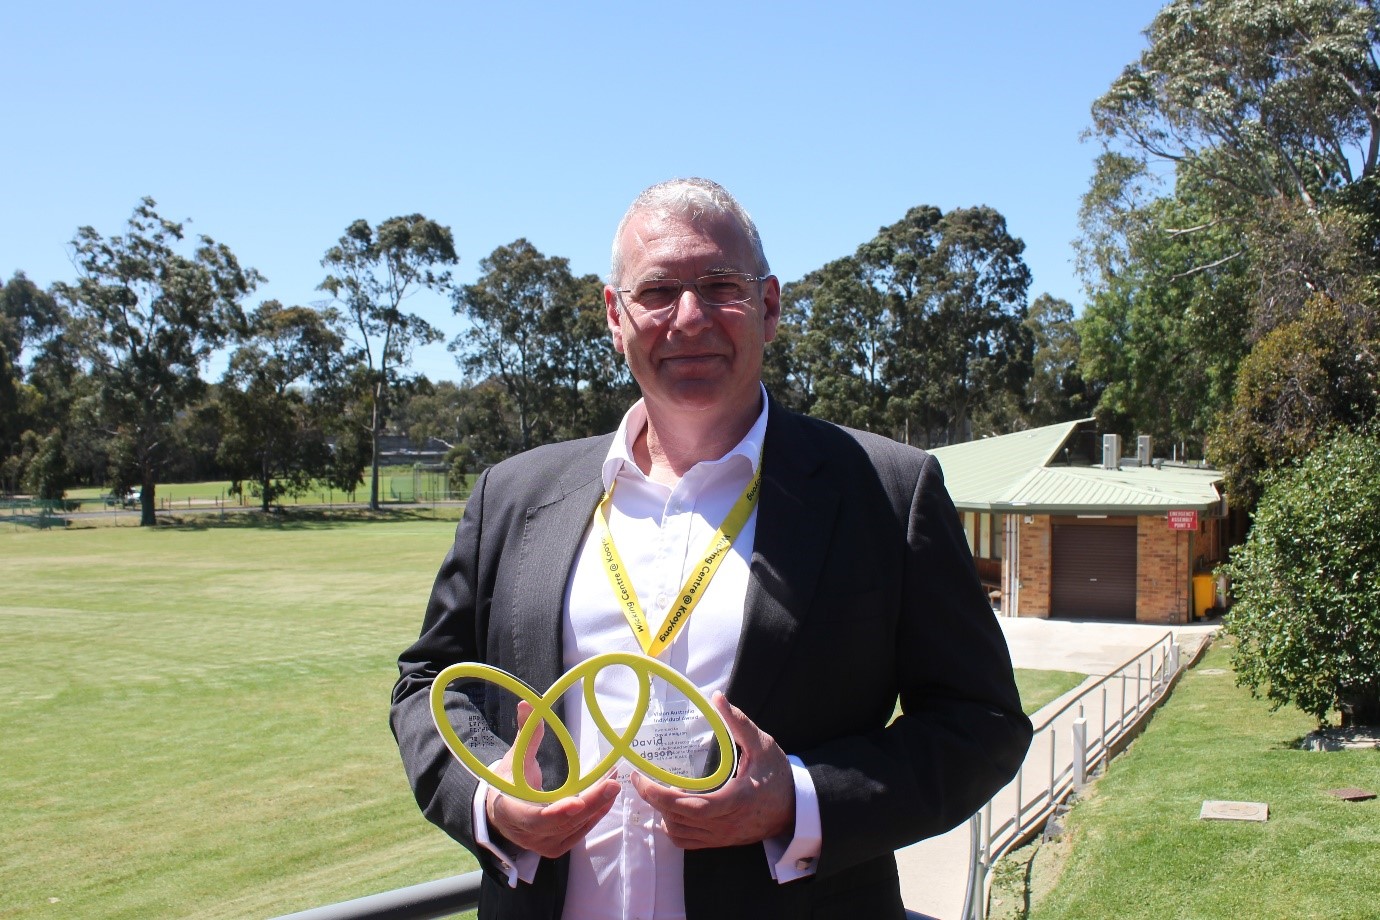 "VA Award winner David, holding his award which takes the shape of the VA logo of 3 yellow ovals linked together"